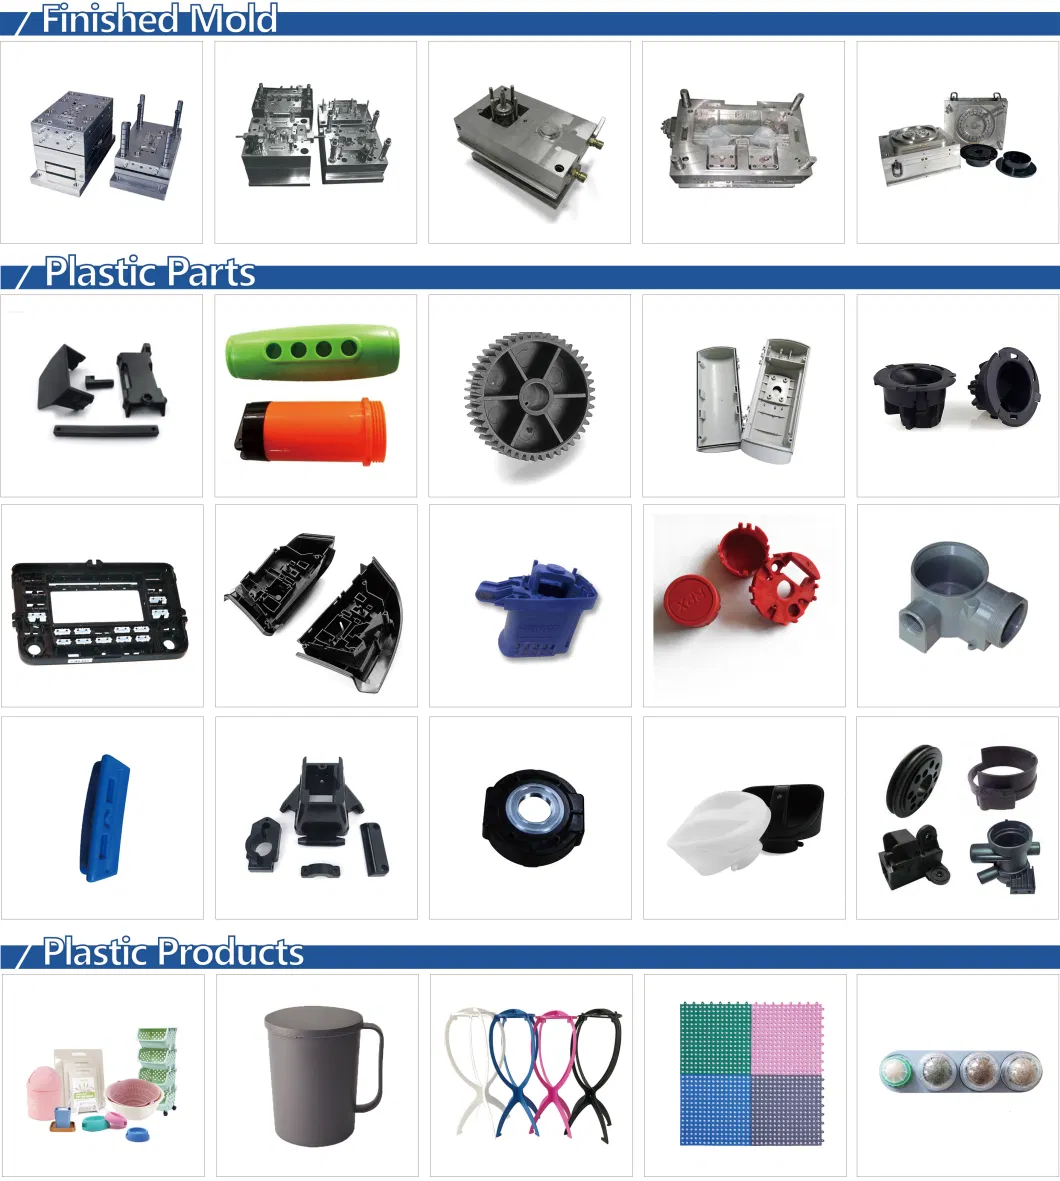 Custom Plastic Injection Molded Cabinet Parts Adjustable Leg/Feet Plastic Parts by PVC/ABS/PP/PE/PA6/PA66